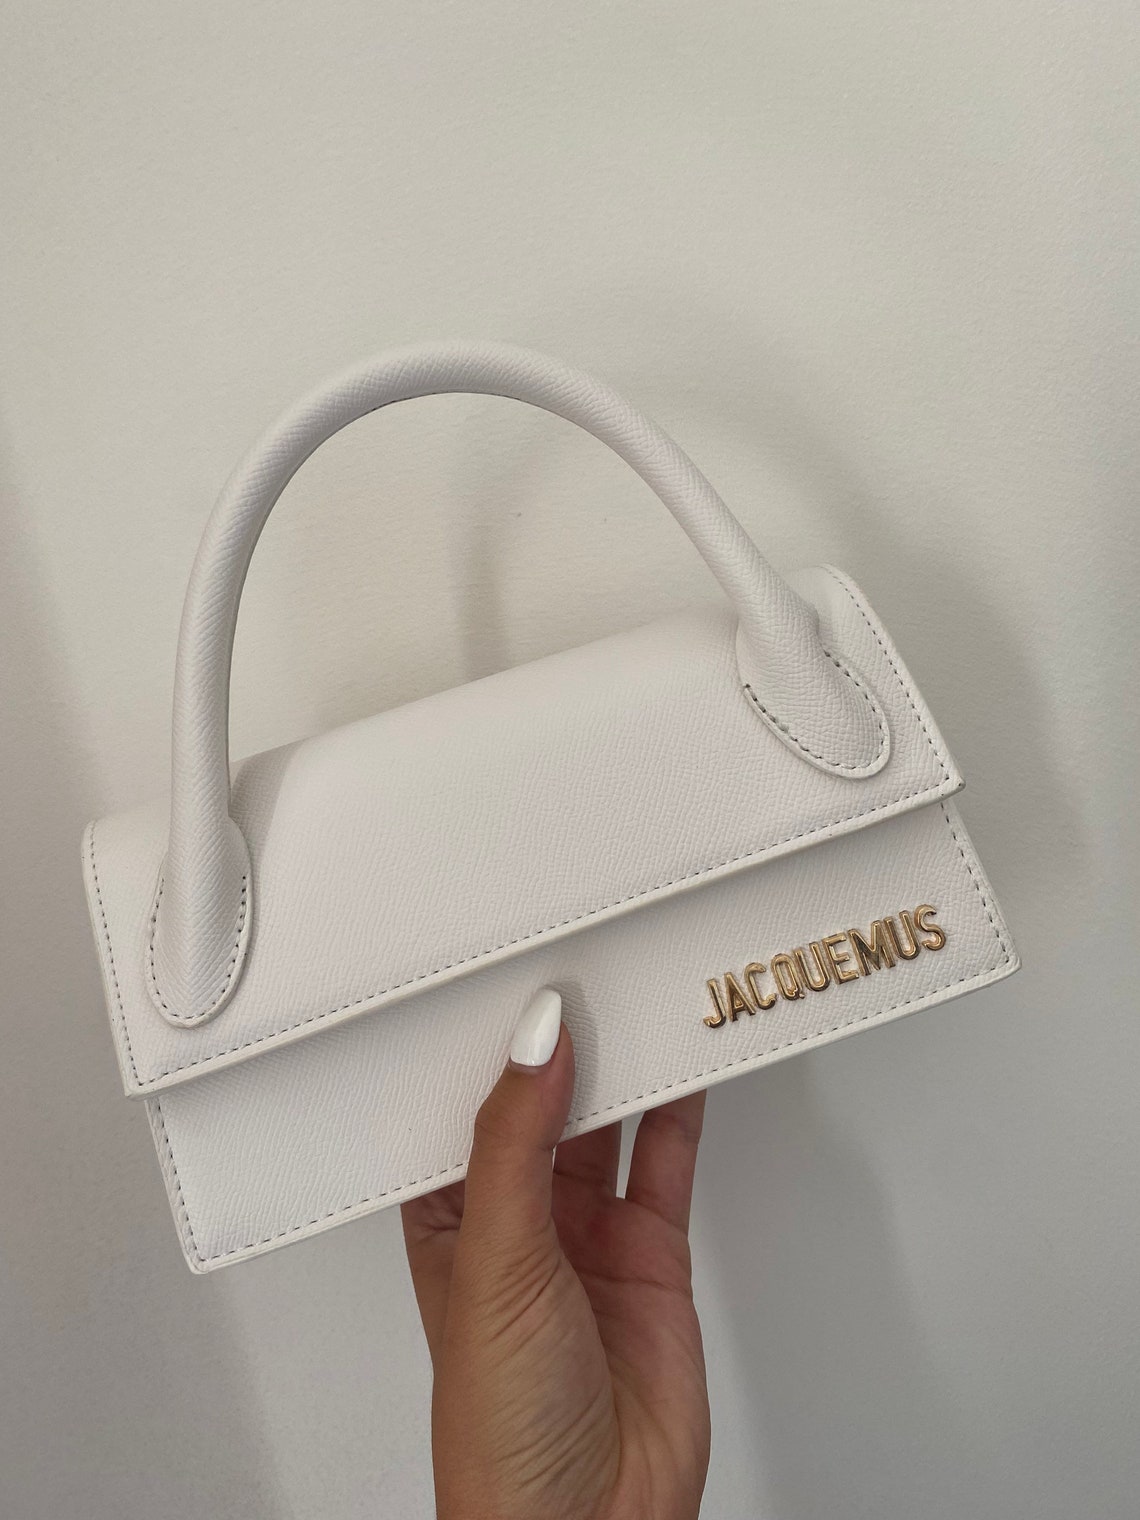 Long Jacquemus Bag with Top Handle for Women | Etsy